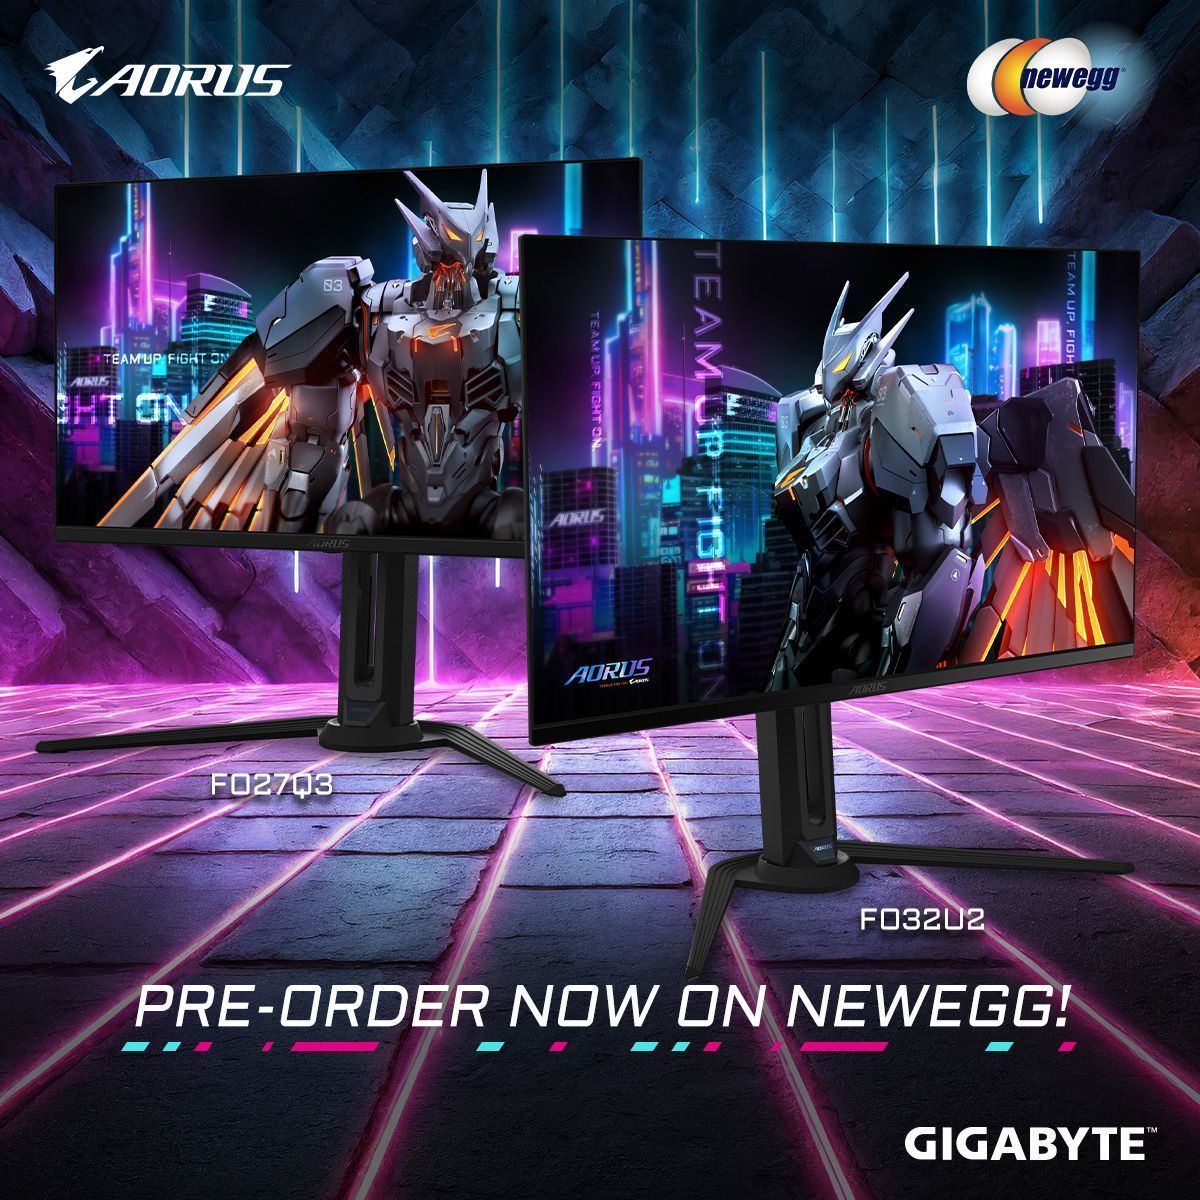 Our new FO27Q3 and FO32U2 QD-OLED monitors are still open for pre-order at Newegg 🥚! You don't want to miss this opportunity to upgrade your gaming set-up to the next level! 📈 

Pre-order at Newegg ⬇️ 
🥚 aorus.shop/oled-preorder

#AORUSNA #GIGABYTE #AORUS #OLED #gaming #monitor